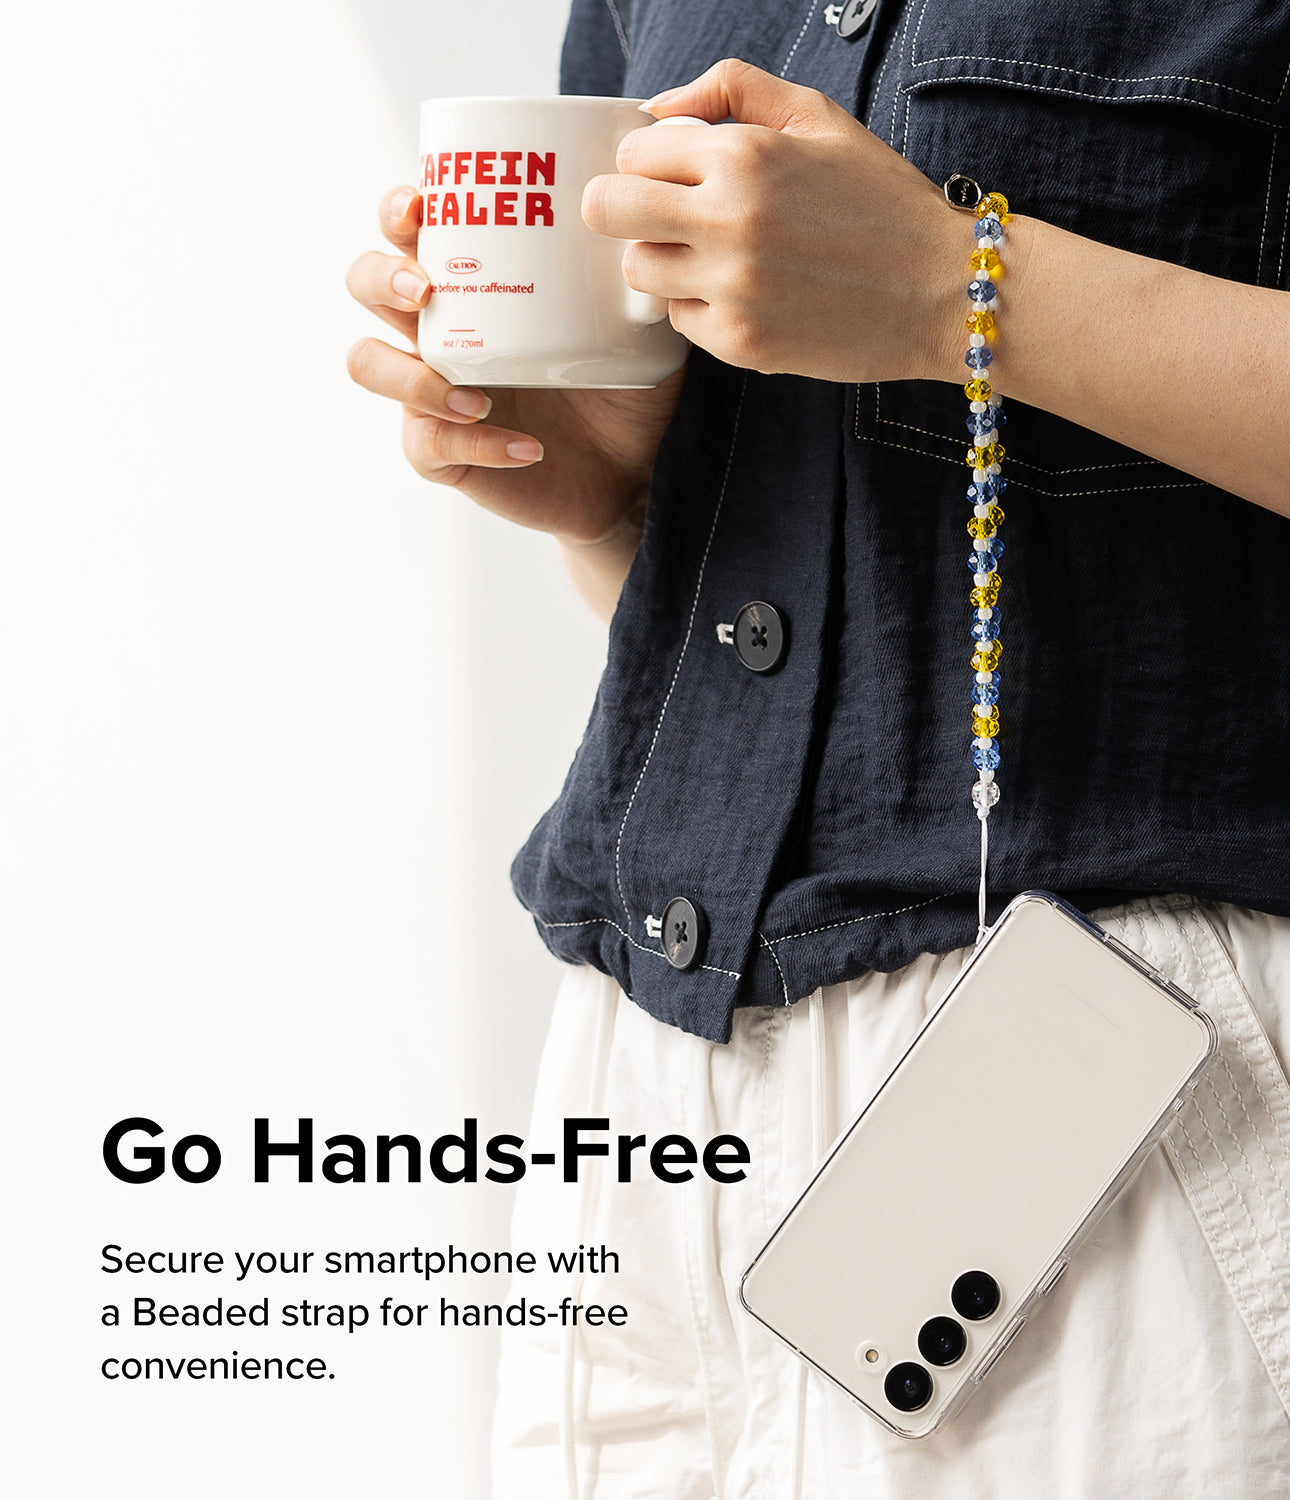 Beaded Strap - Go Hands-Free. Secure your smartphone with a Beaded strap for hands-free convenience